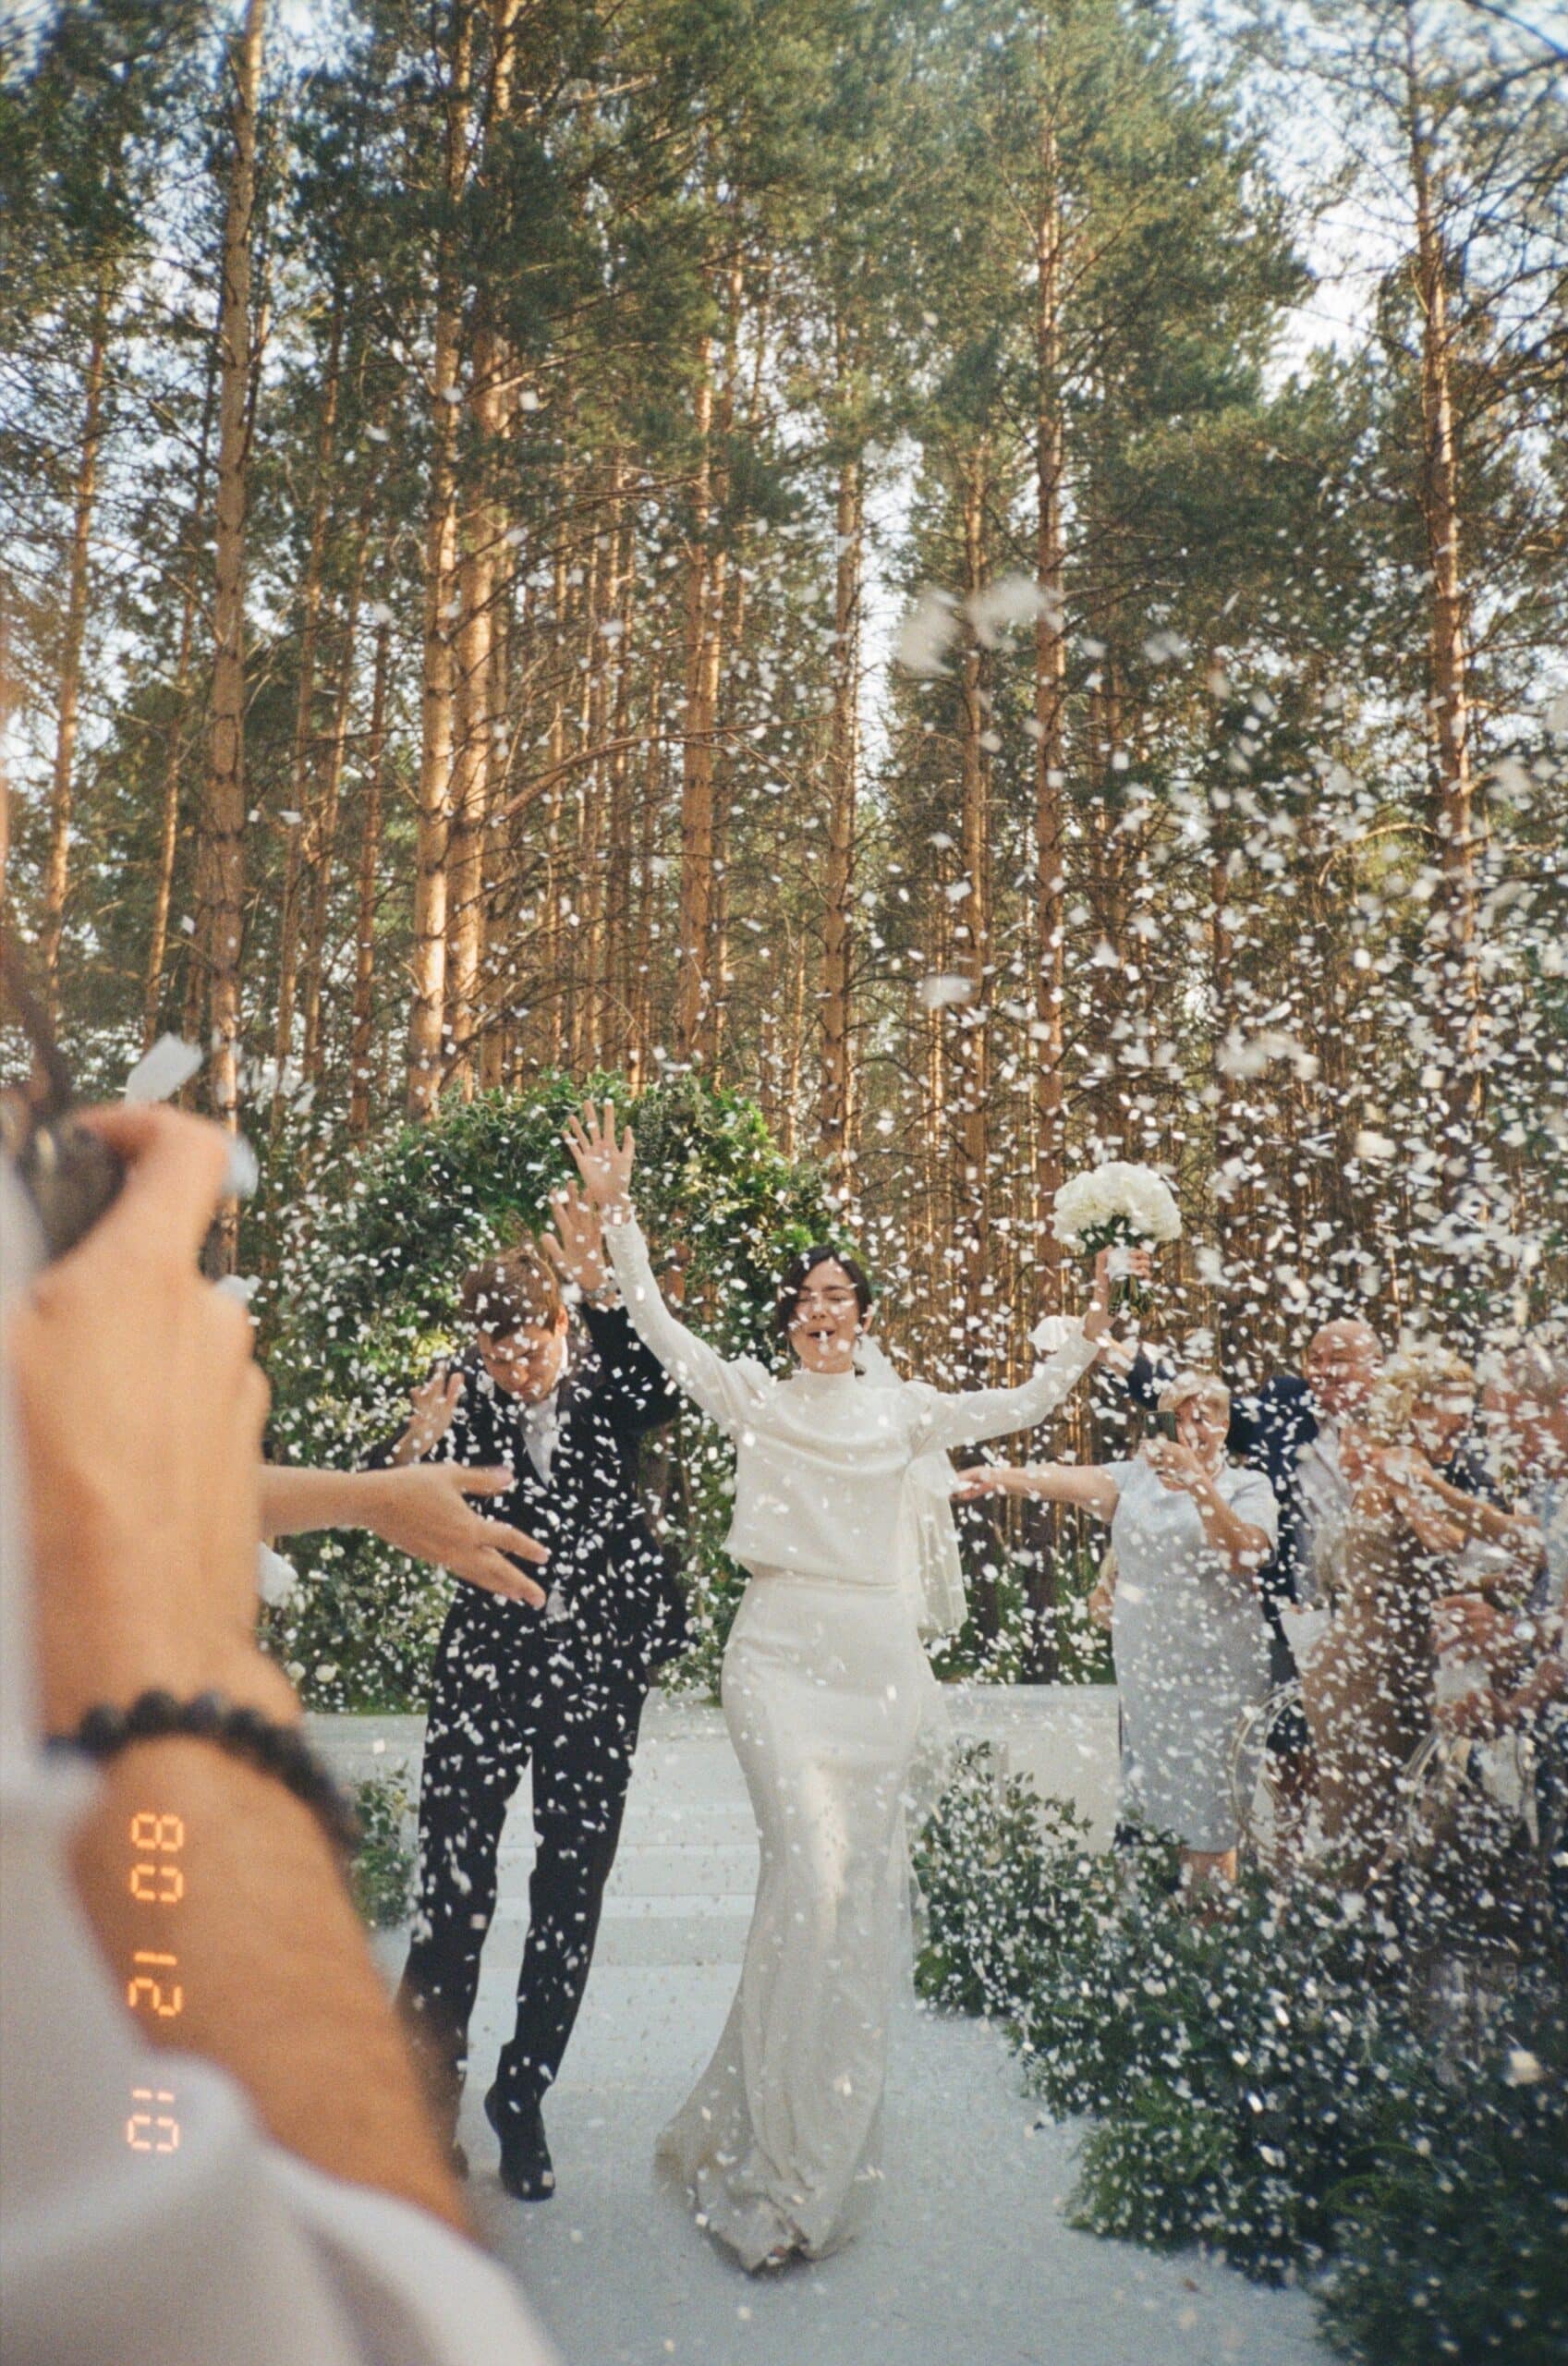 Event Venue Ideas Photo by Тямаев Миша: https://www.pexels.com/photo/newlyweds-celebrating-in-forest-9942259/